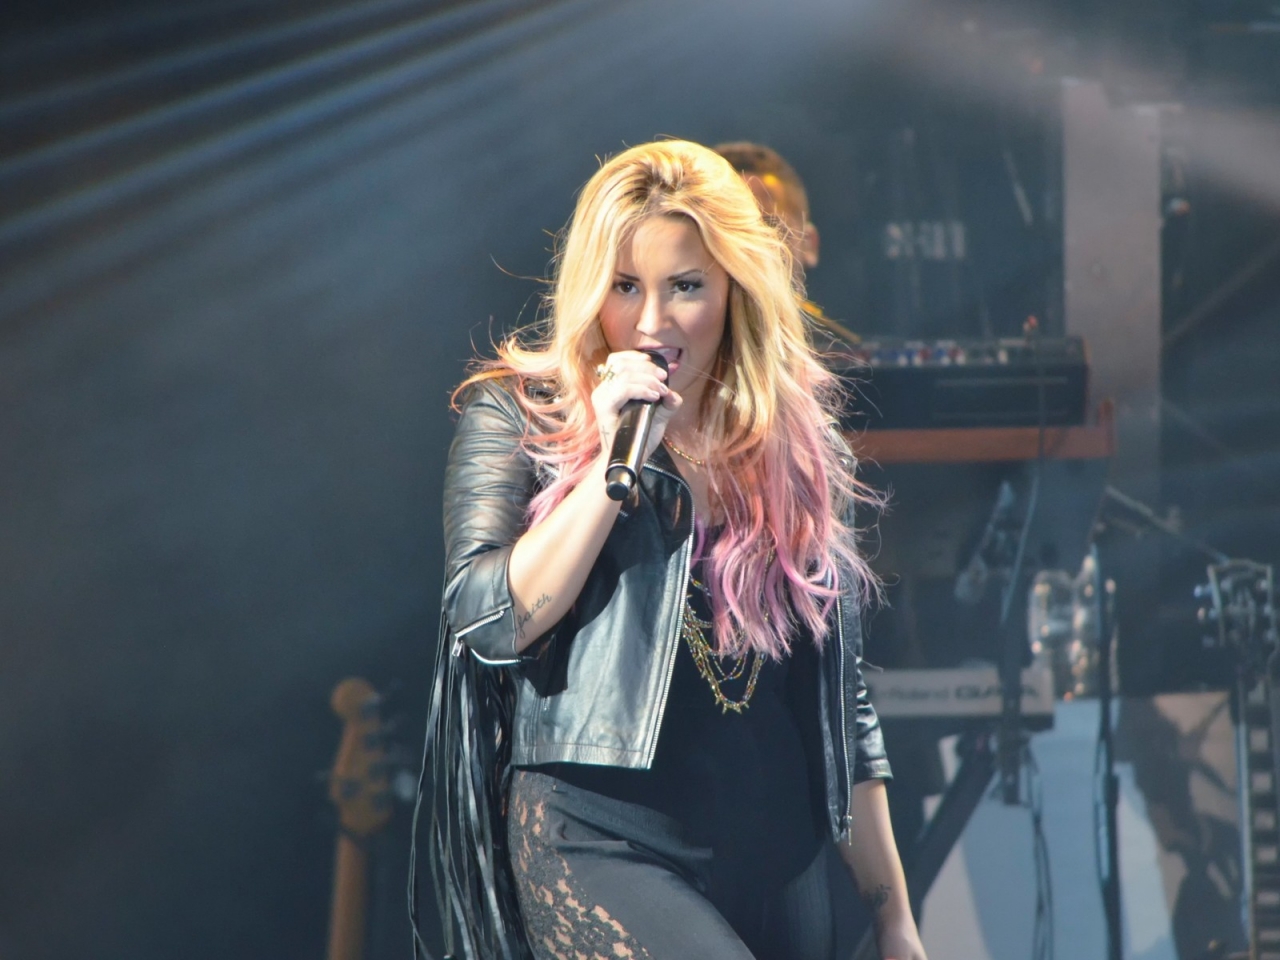 Demi Lovato Performing  for 1280 x 960 resolution